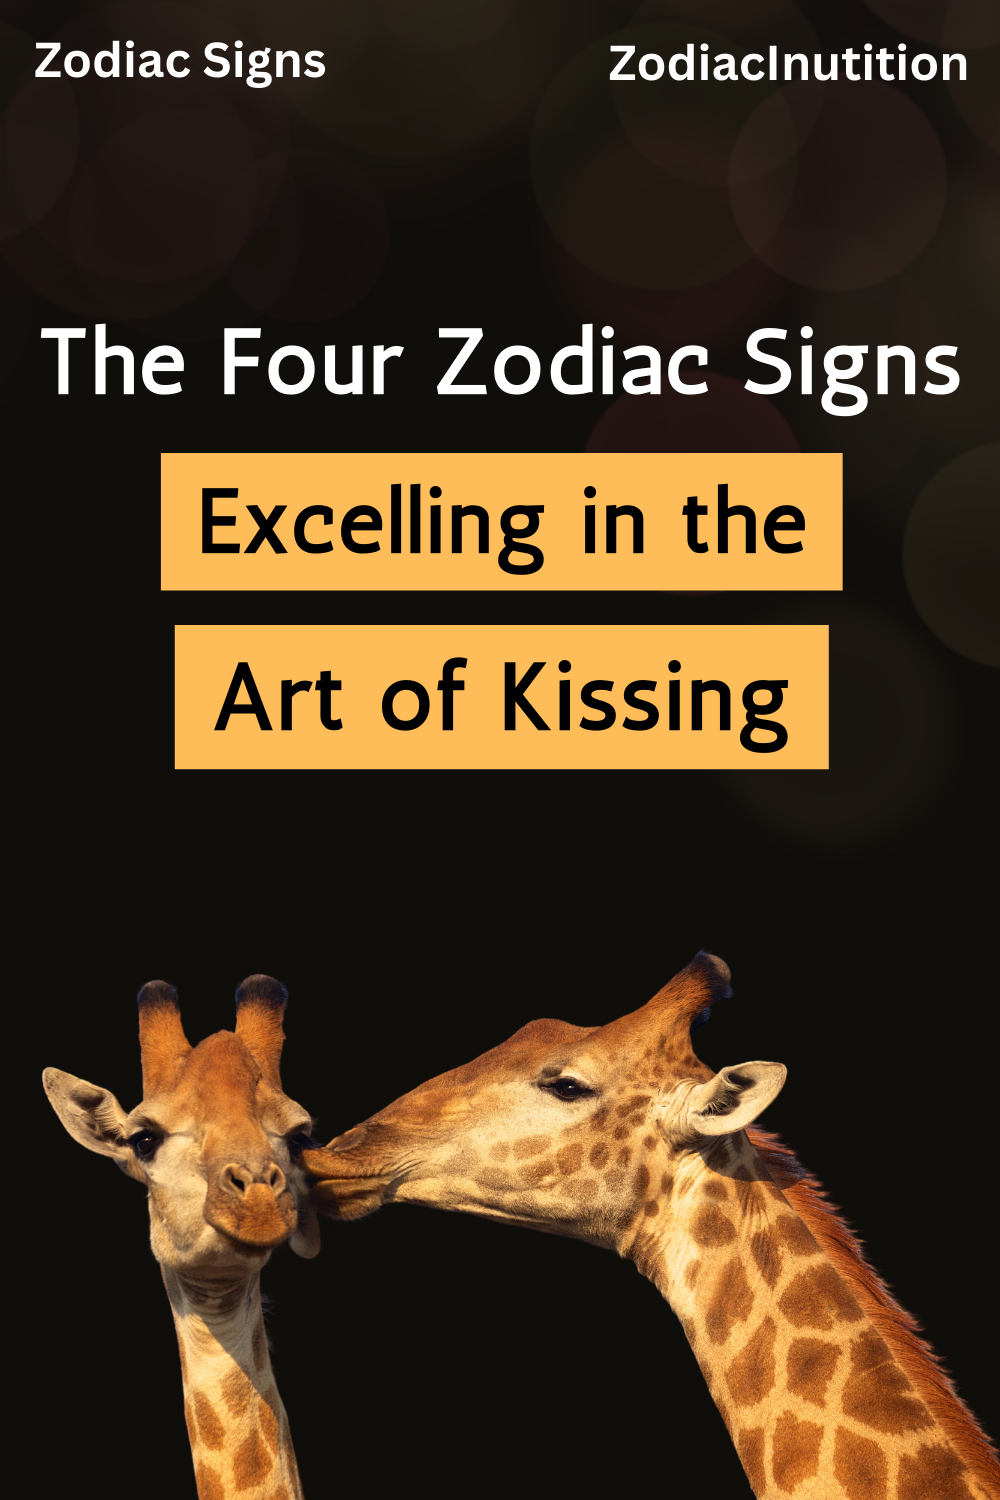 The Four Zodiac Signs Excelling in the Art of Kissing